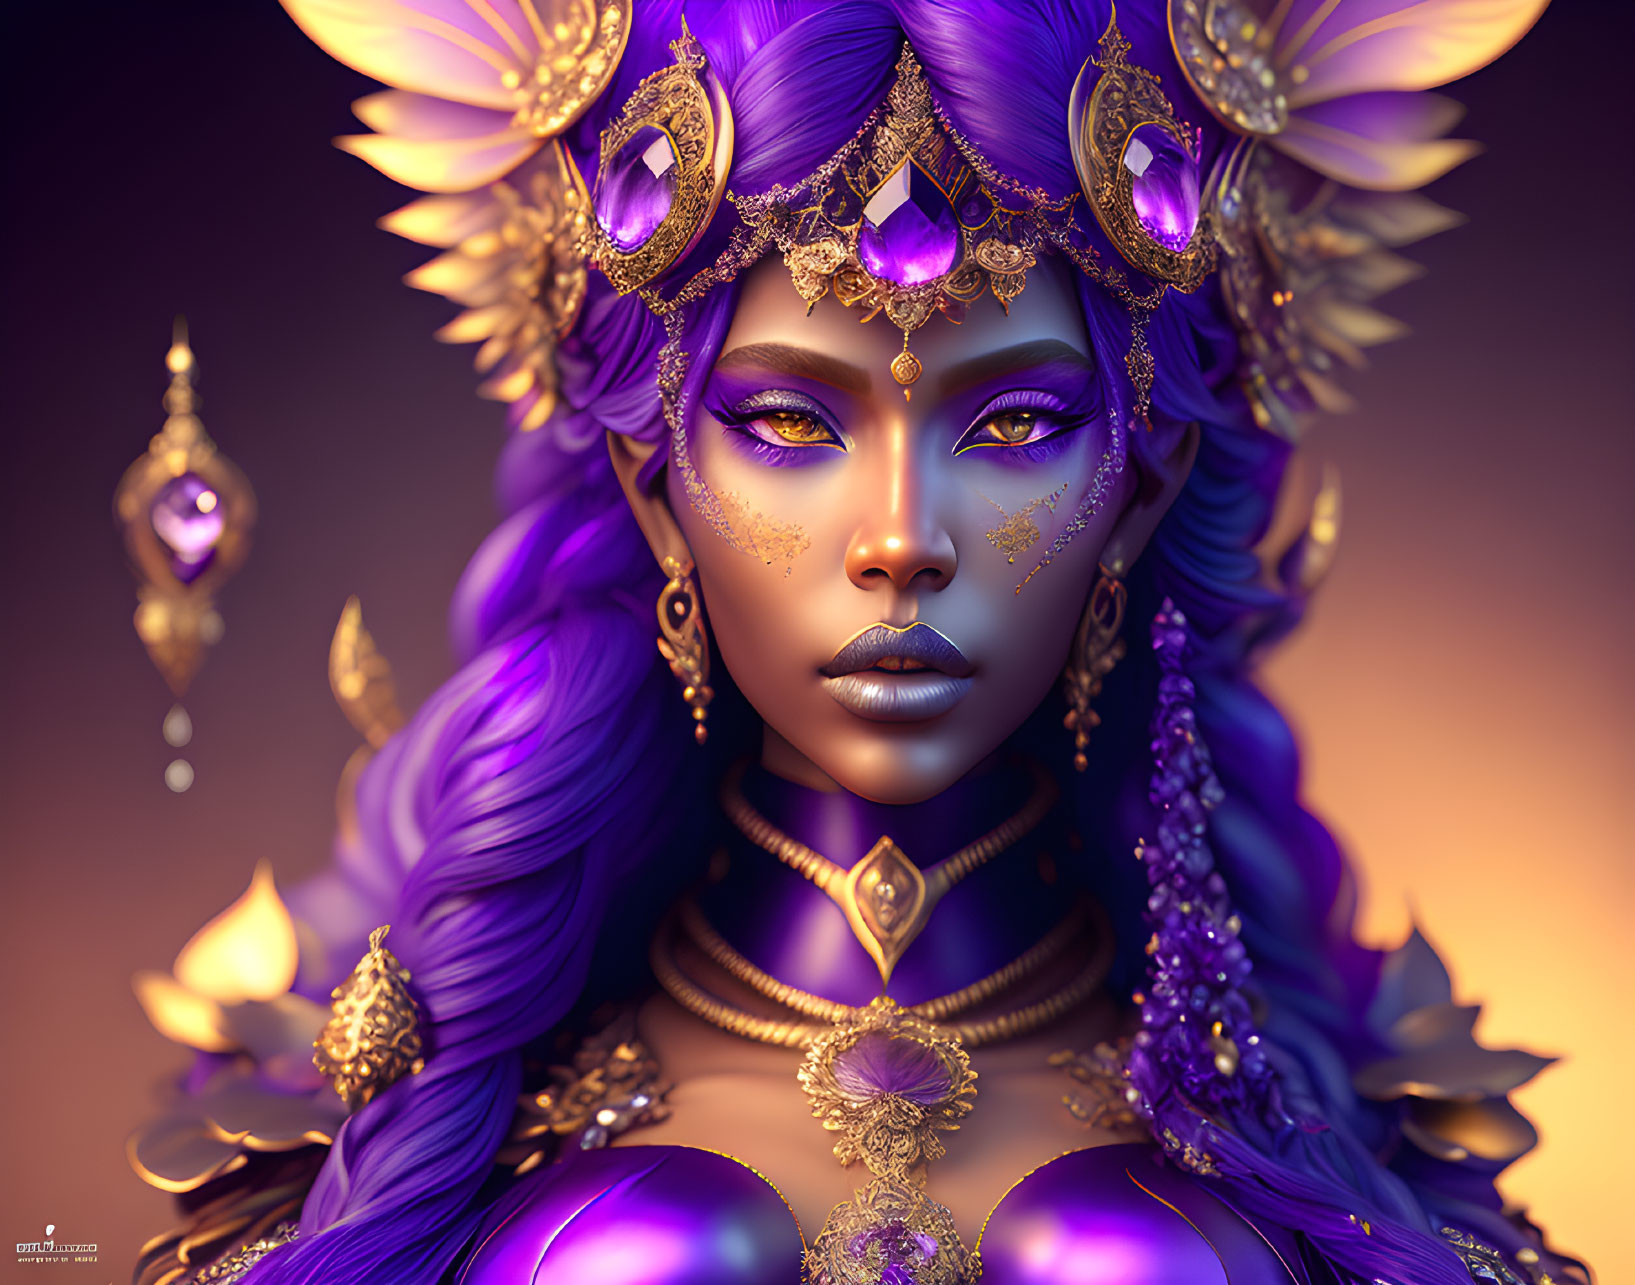 Violet-skinned woman with golden headdress and purple hair portrait.